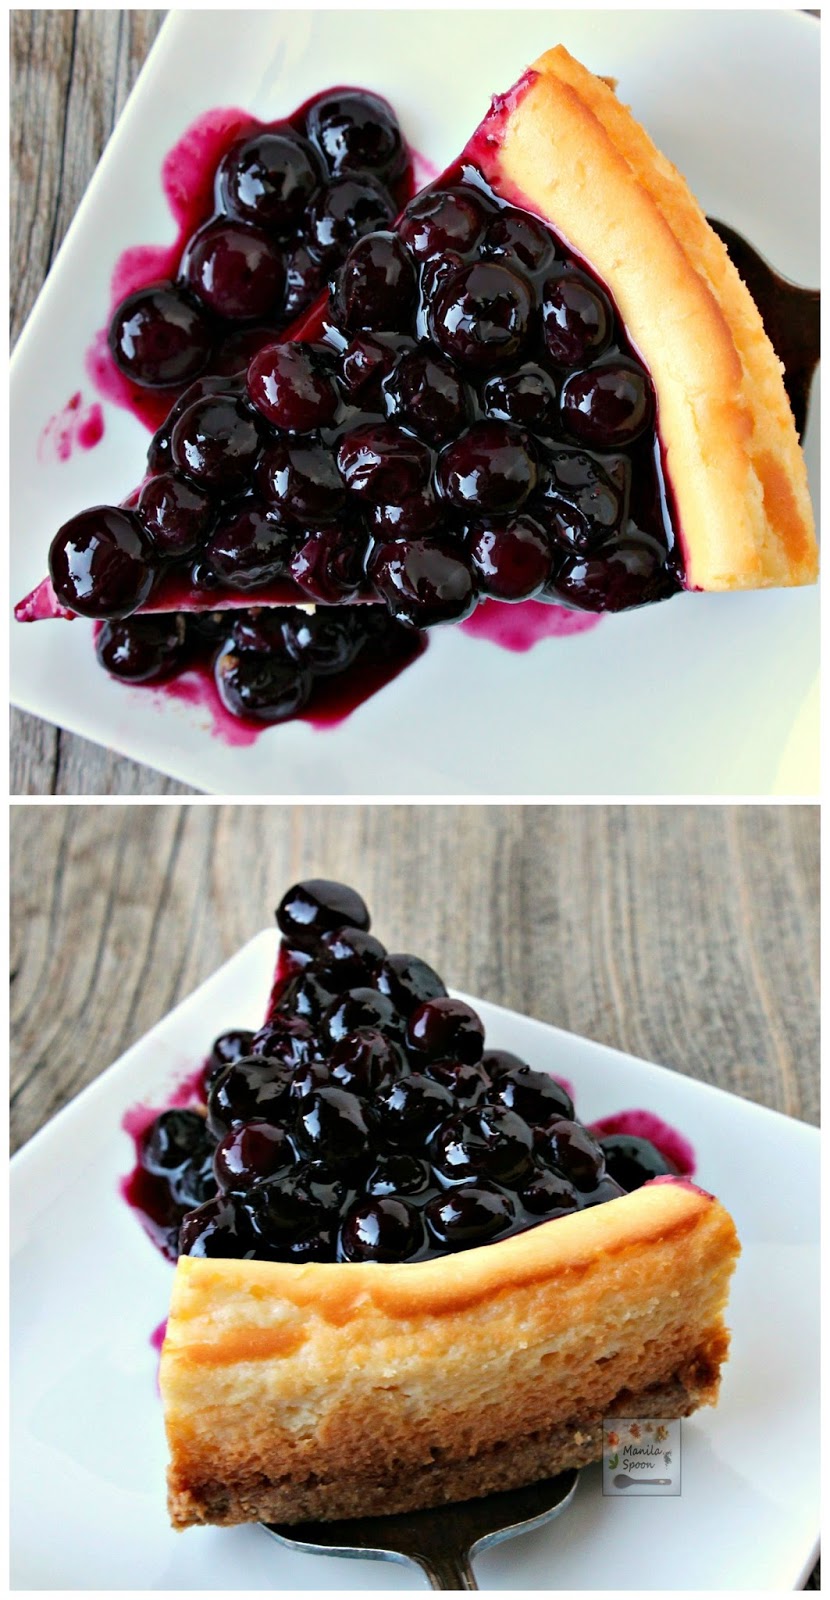 Delicious and creamy blueberry cheesecake with a luscious sweet-tangy sauce that brings this dessert over the top. Fresh or frozen blueberries can be used so it's an all-season dessert.